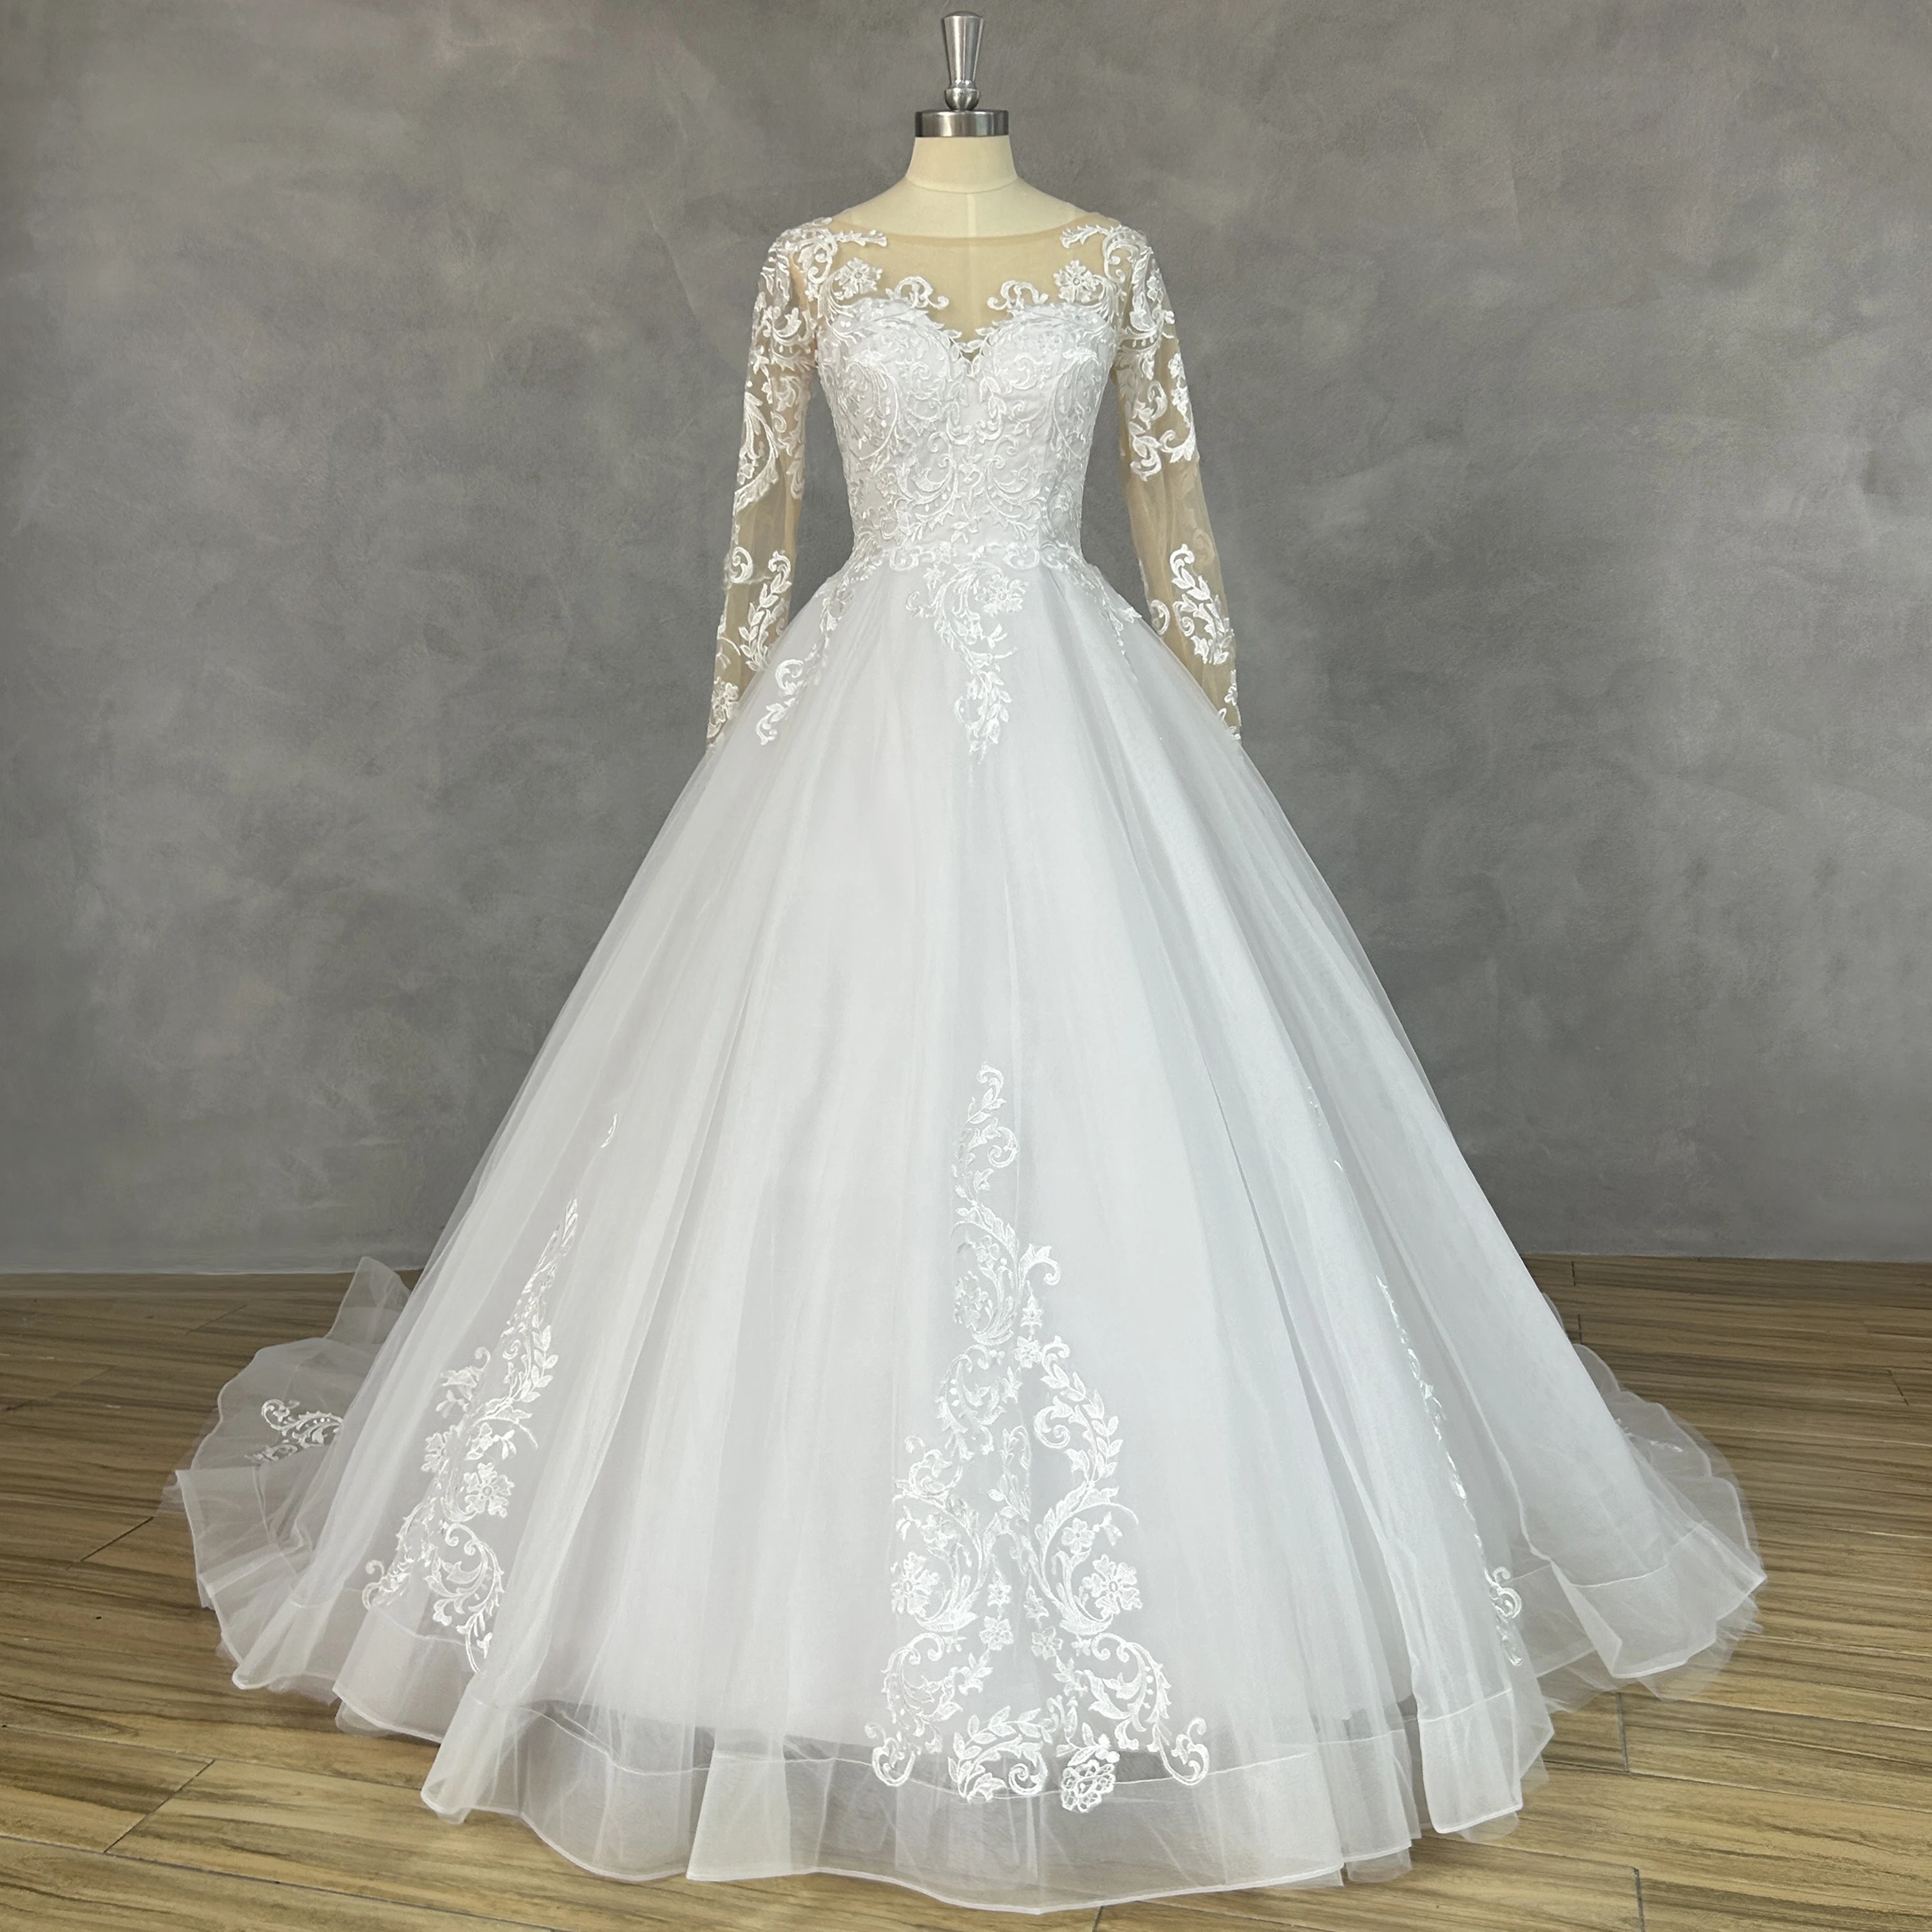 

DIDEYTTAWL Real Picture O-Neck Appliques Long Sleeves Ball Gown Wedding Dress A-Line Button Back Bridal Gown Custom Made